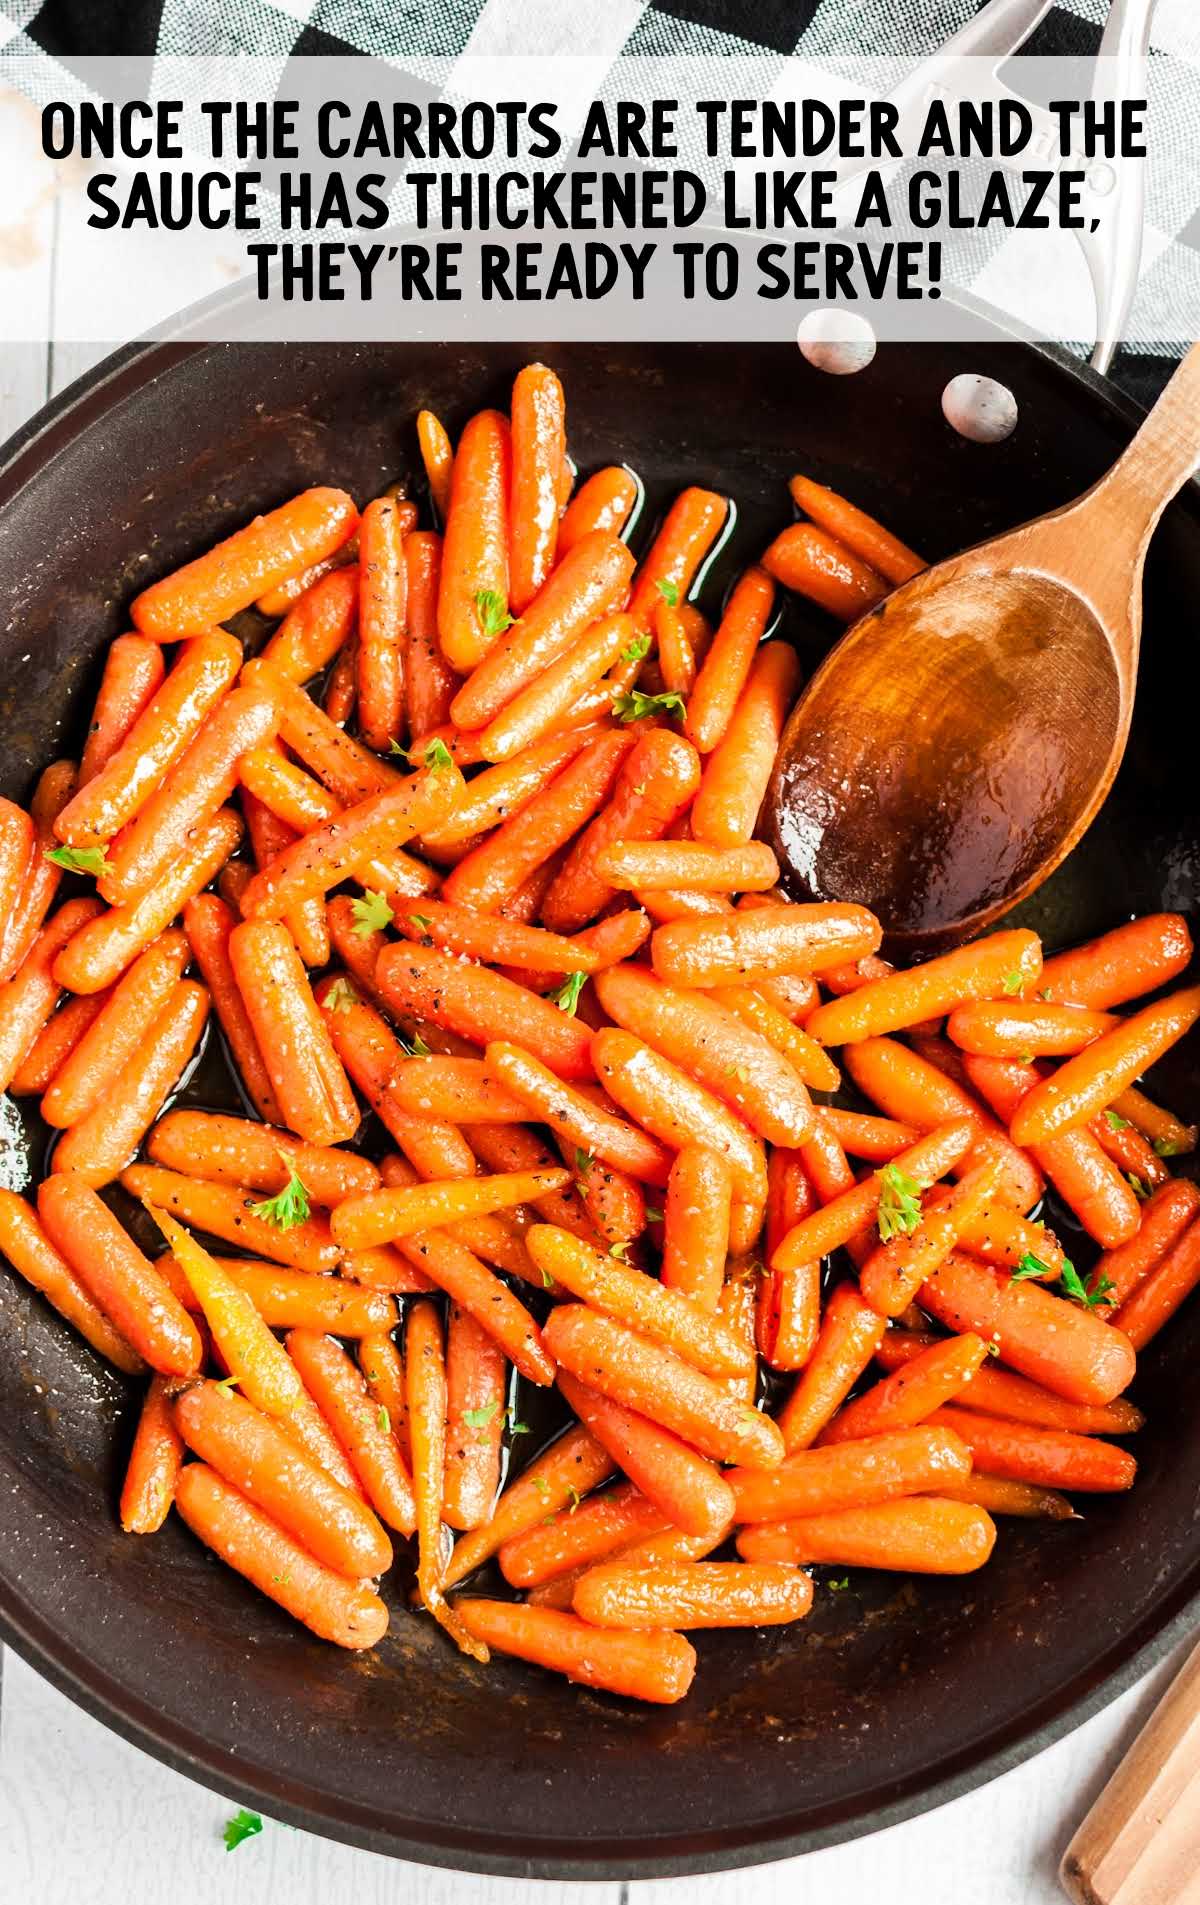 carrots cooked until they start to glaze